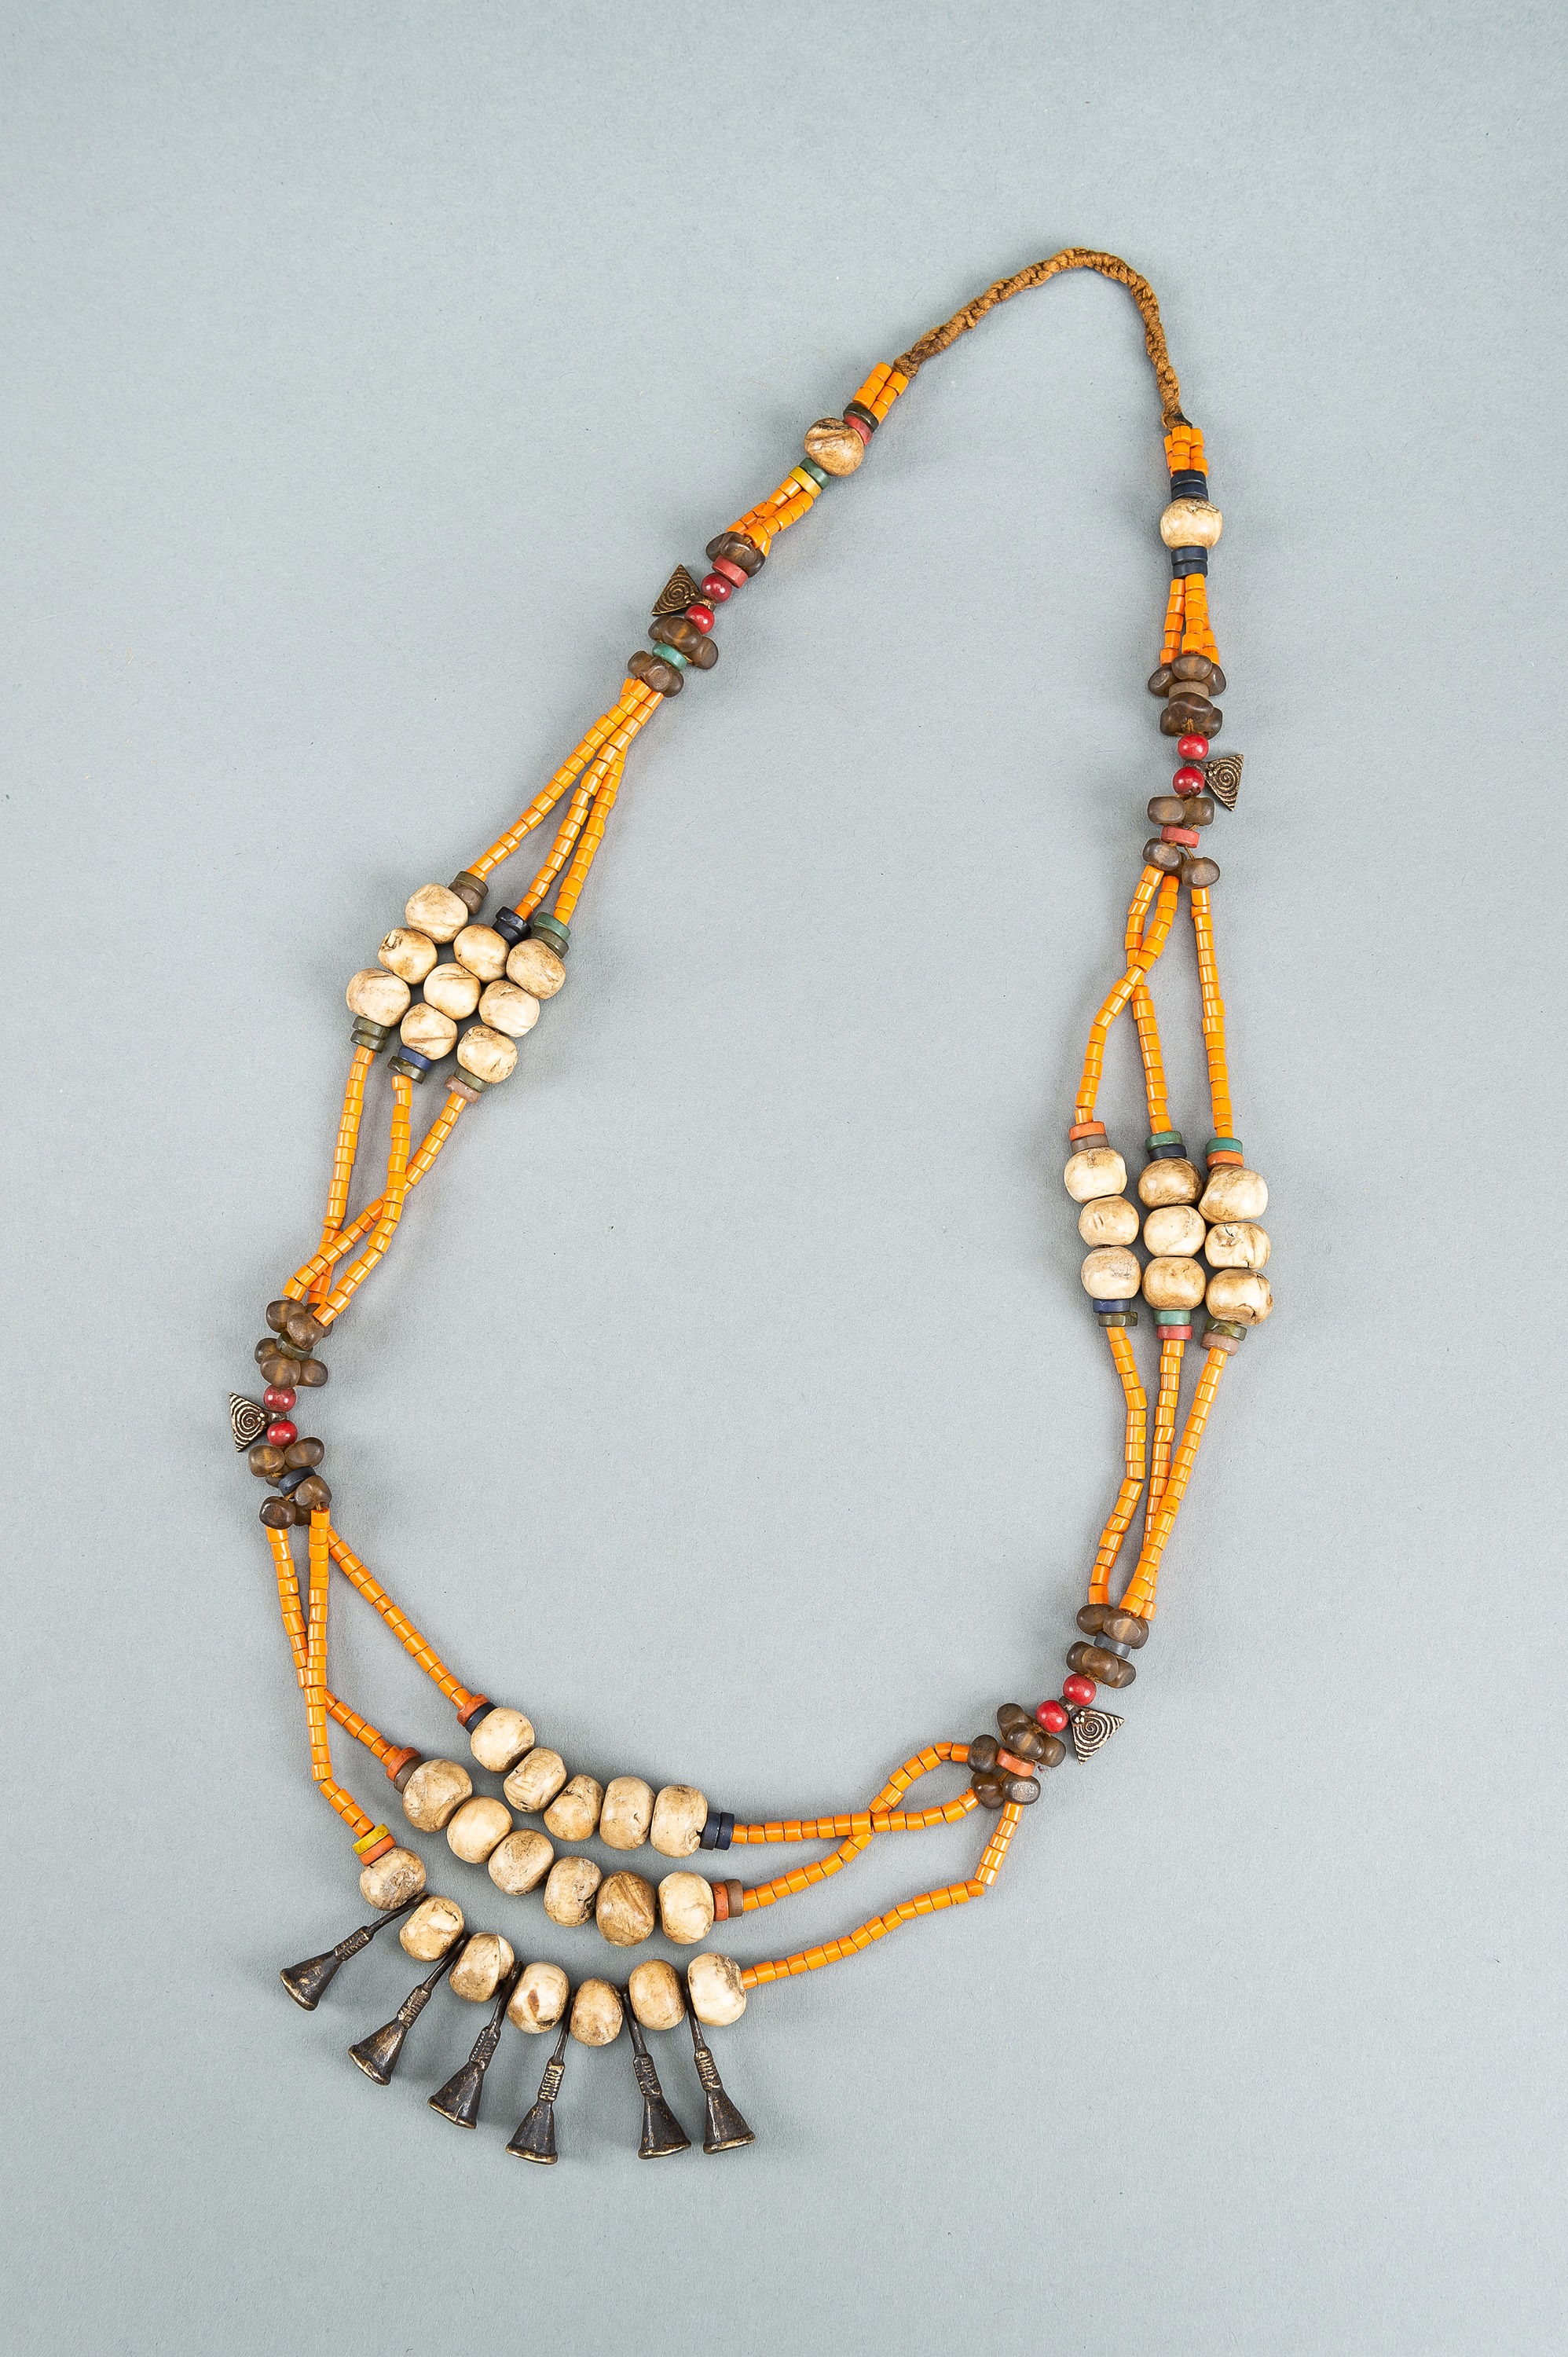 A NAGALAND MULTI-COLORED GLASS, BRASS AND SHELL NECKLACE, c. 1900s - Image 9 of 10